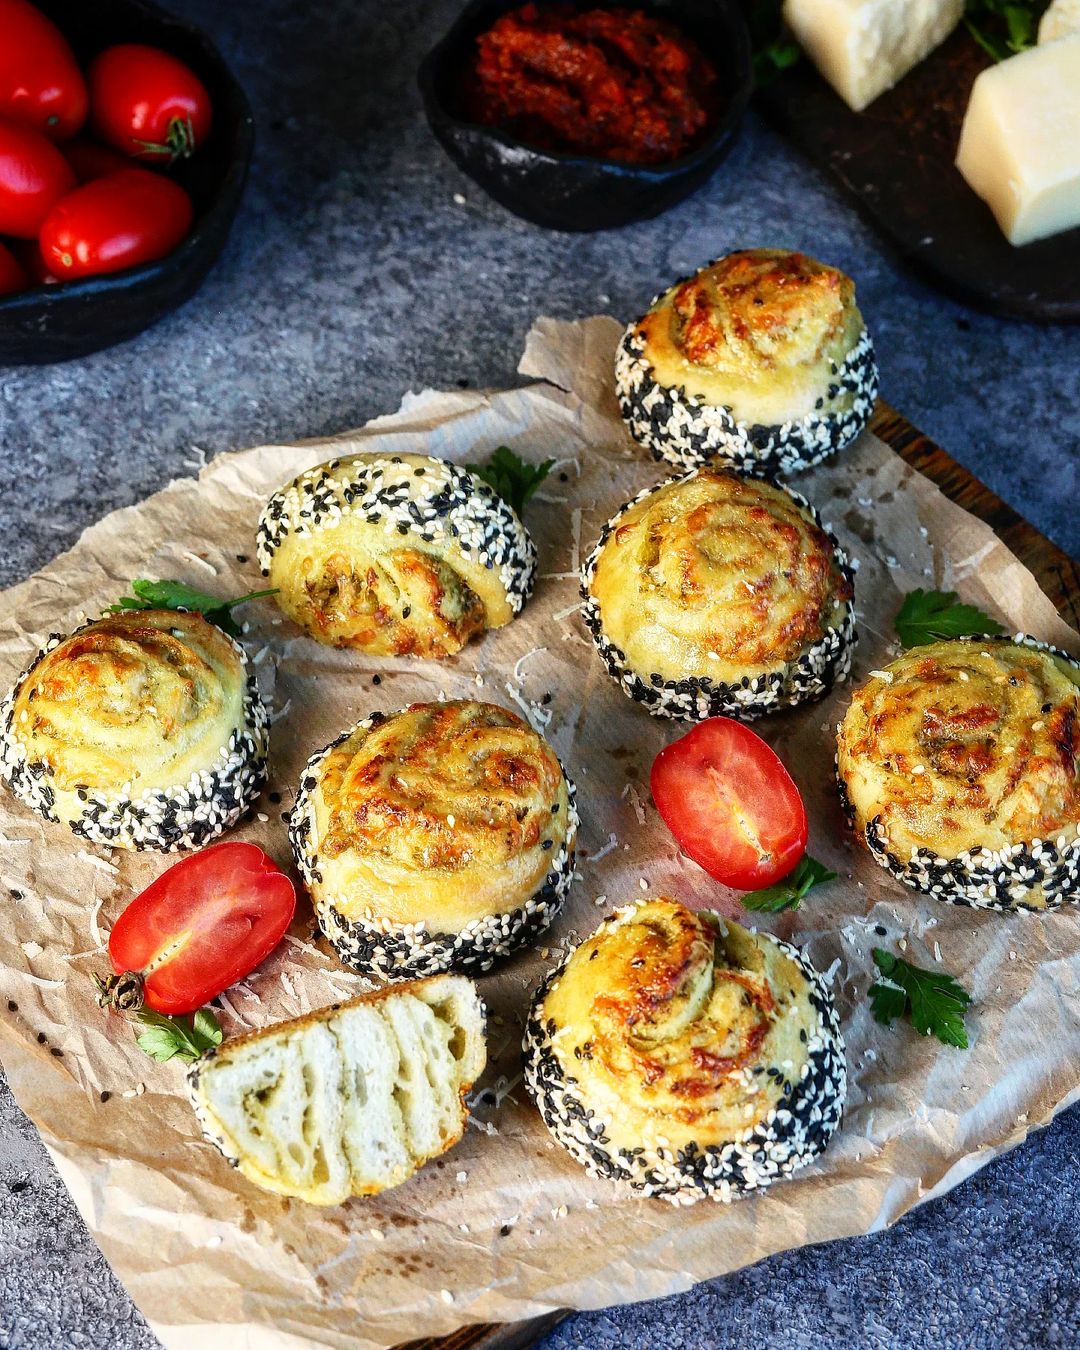 Pesto and Cheese Rolls - Quick and Delicious